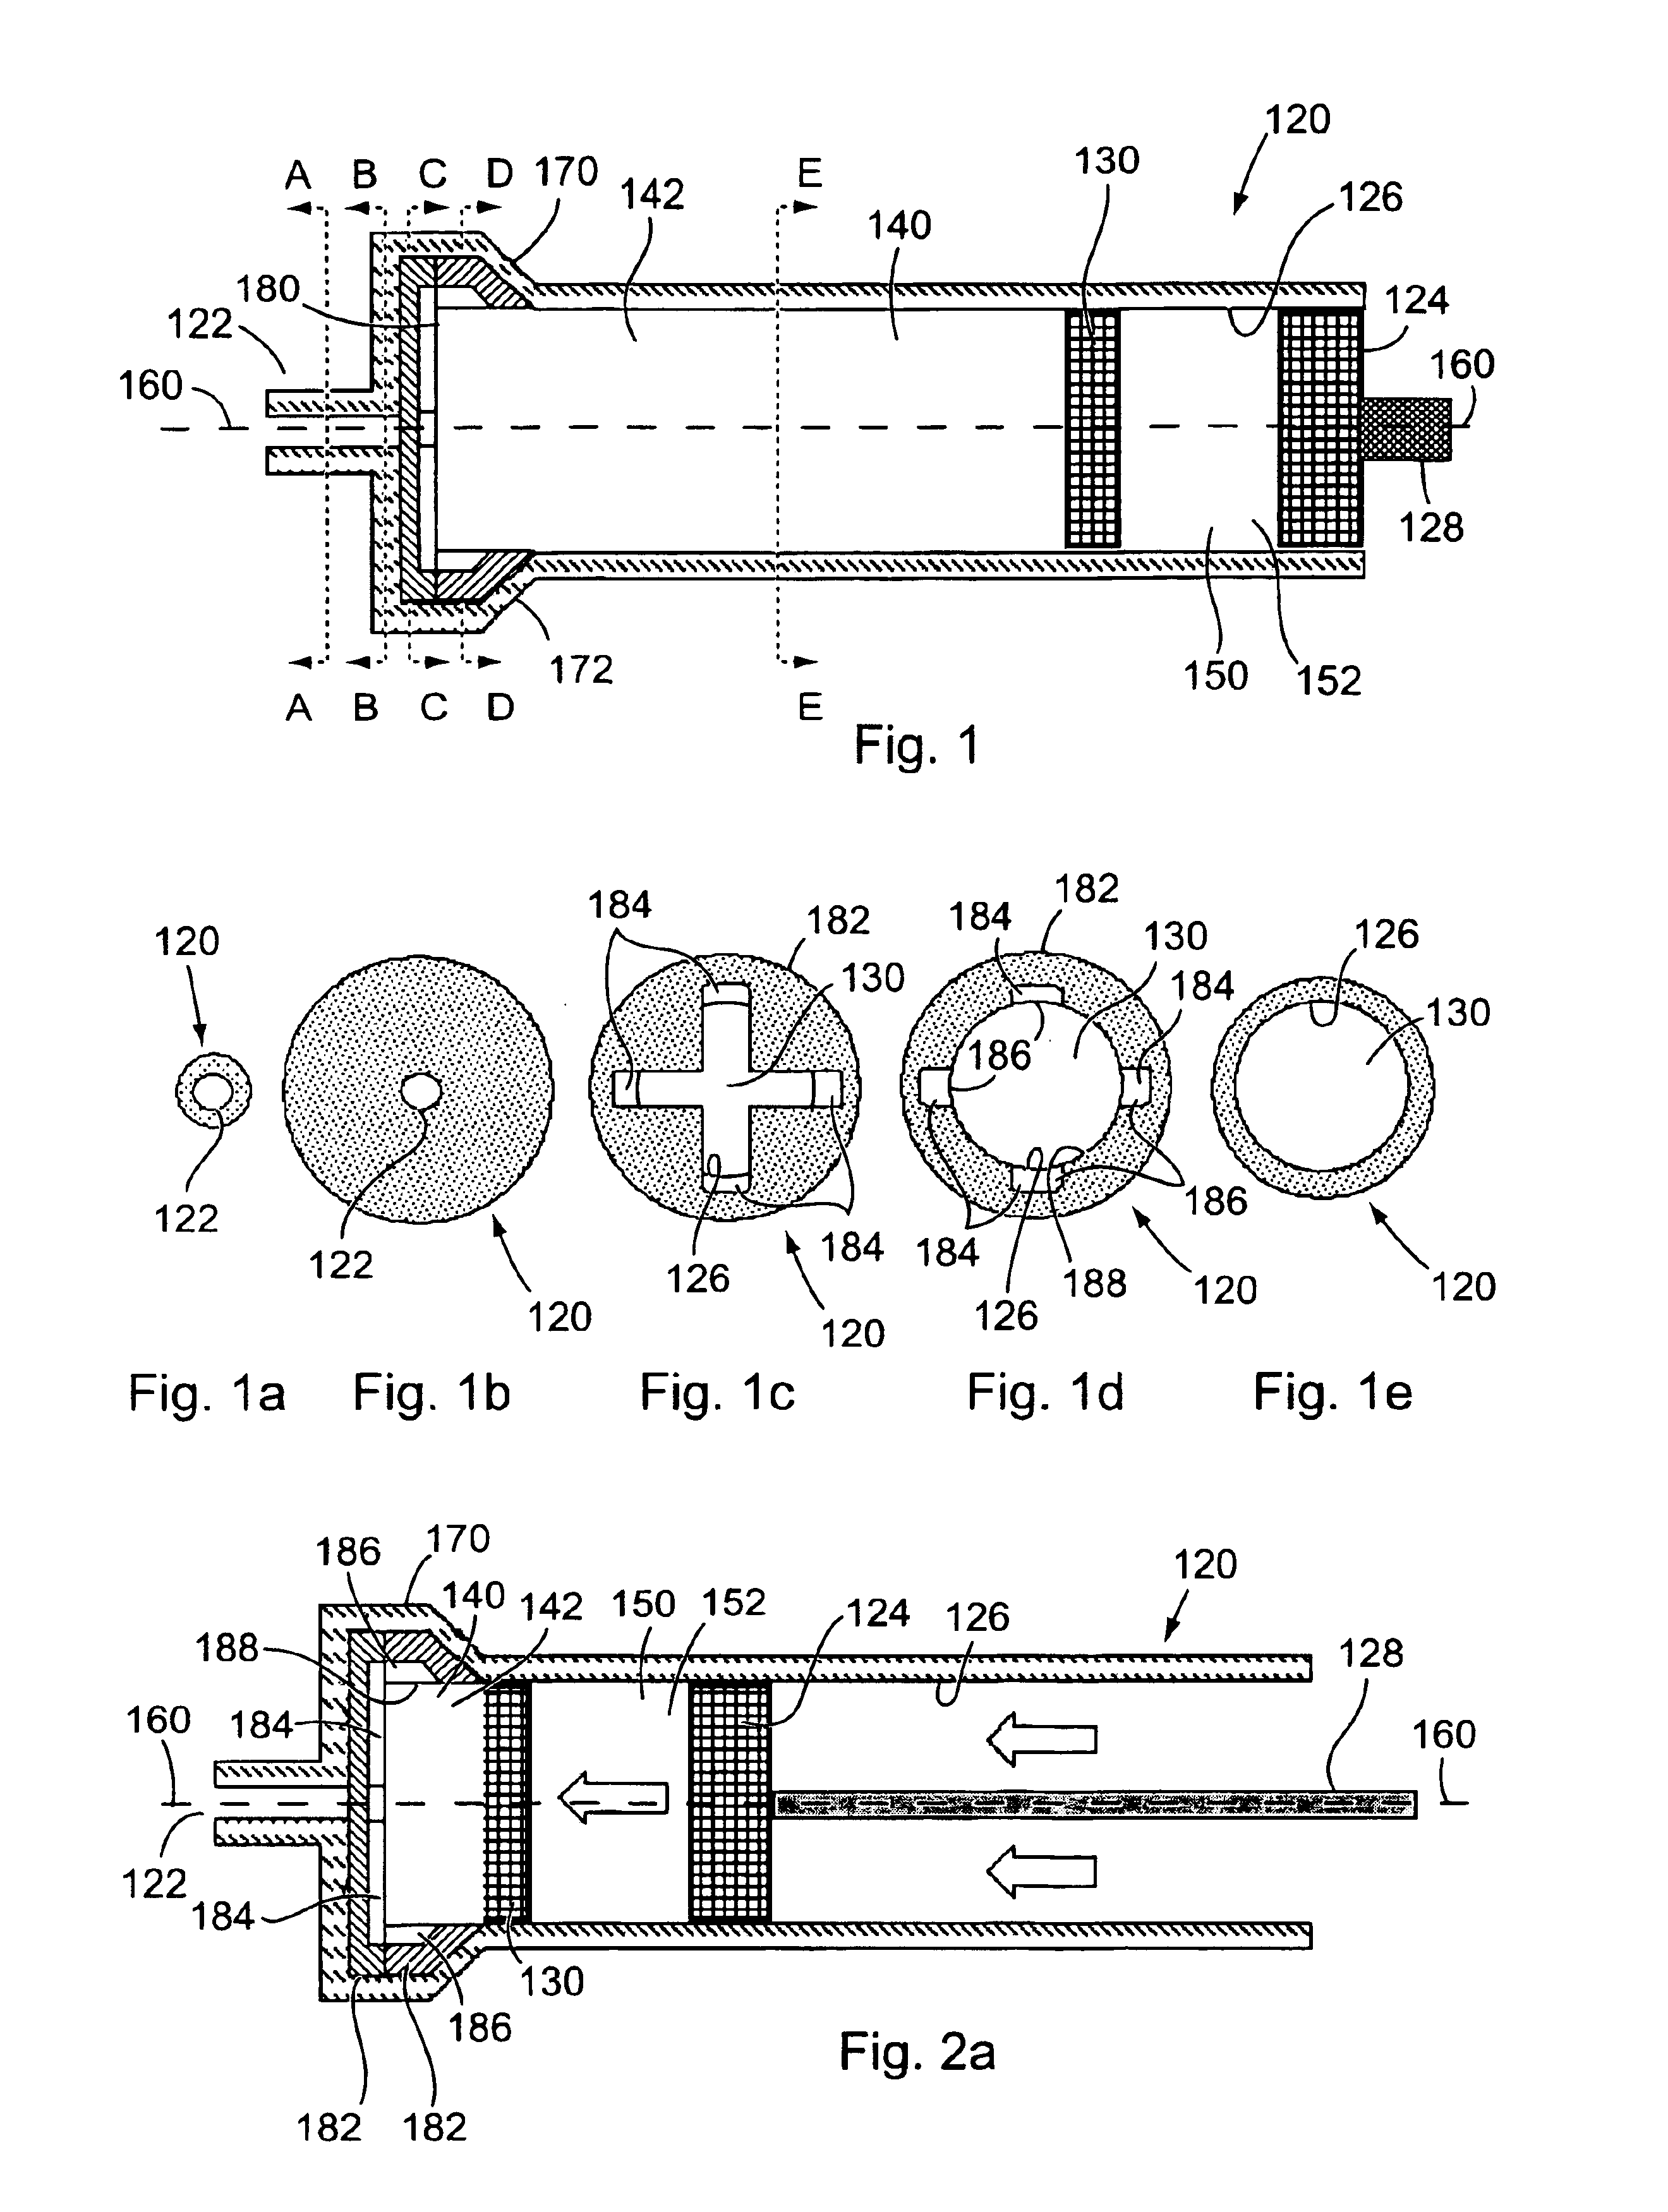 Method and apparatus for sequential delivery of multiple injectable substances stored in a prefilled syringe